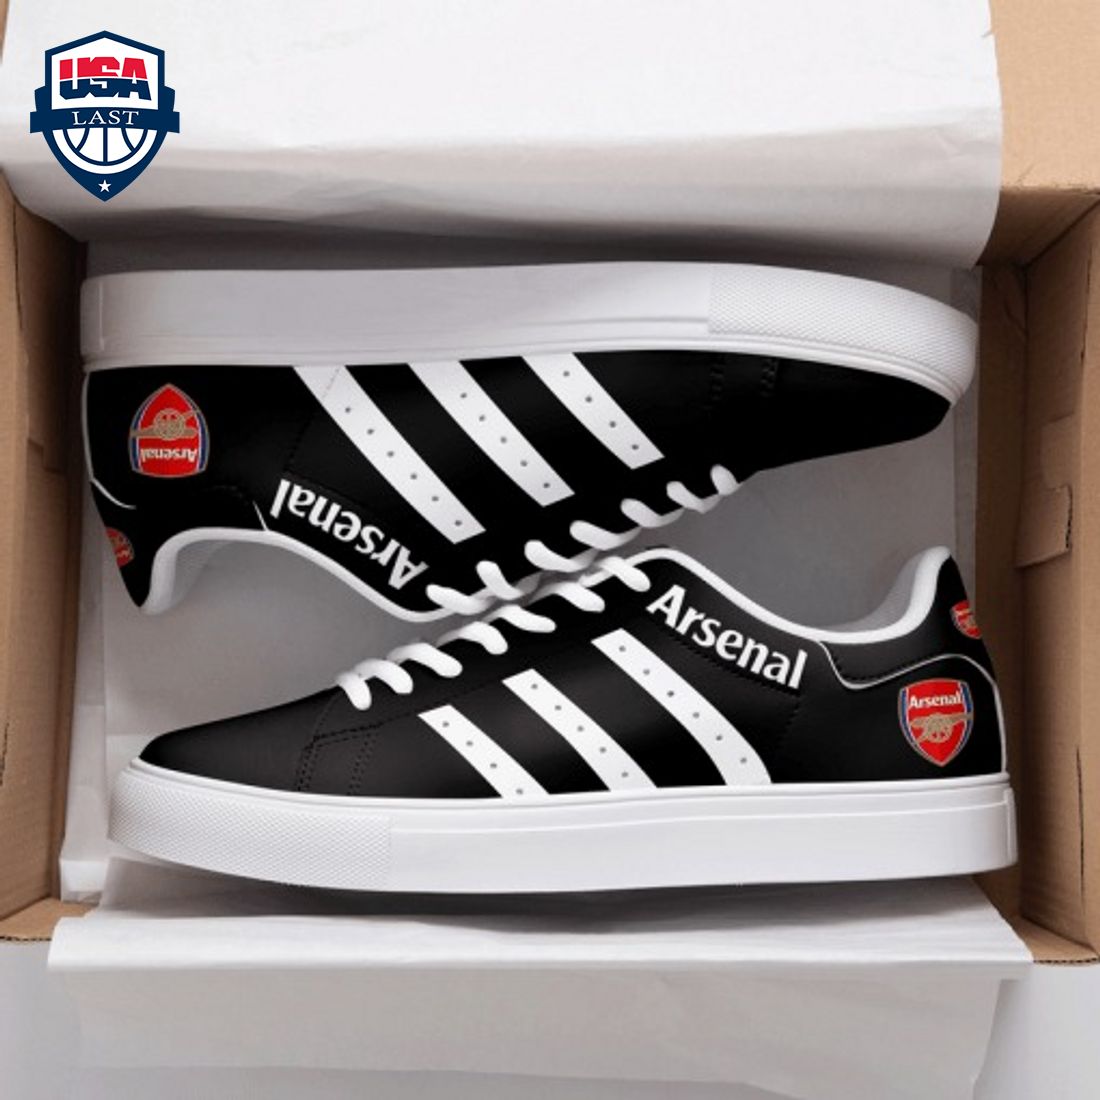 Arsenal FC White Stripes Style 1 Stan Smith Low Top Shoes - Unique and sober